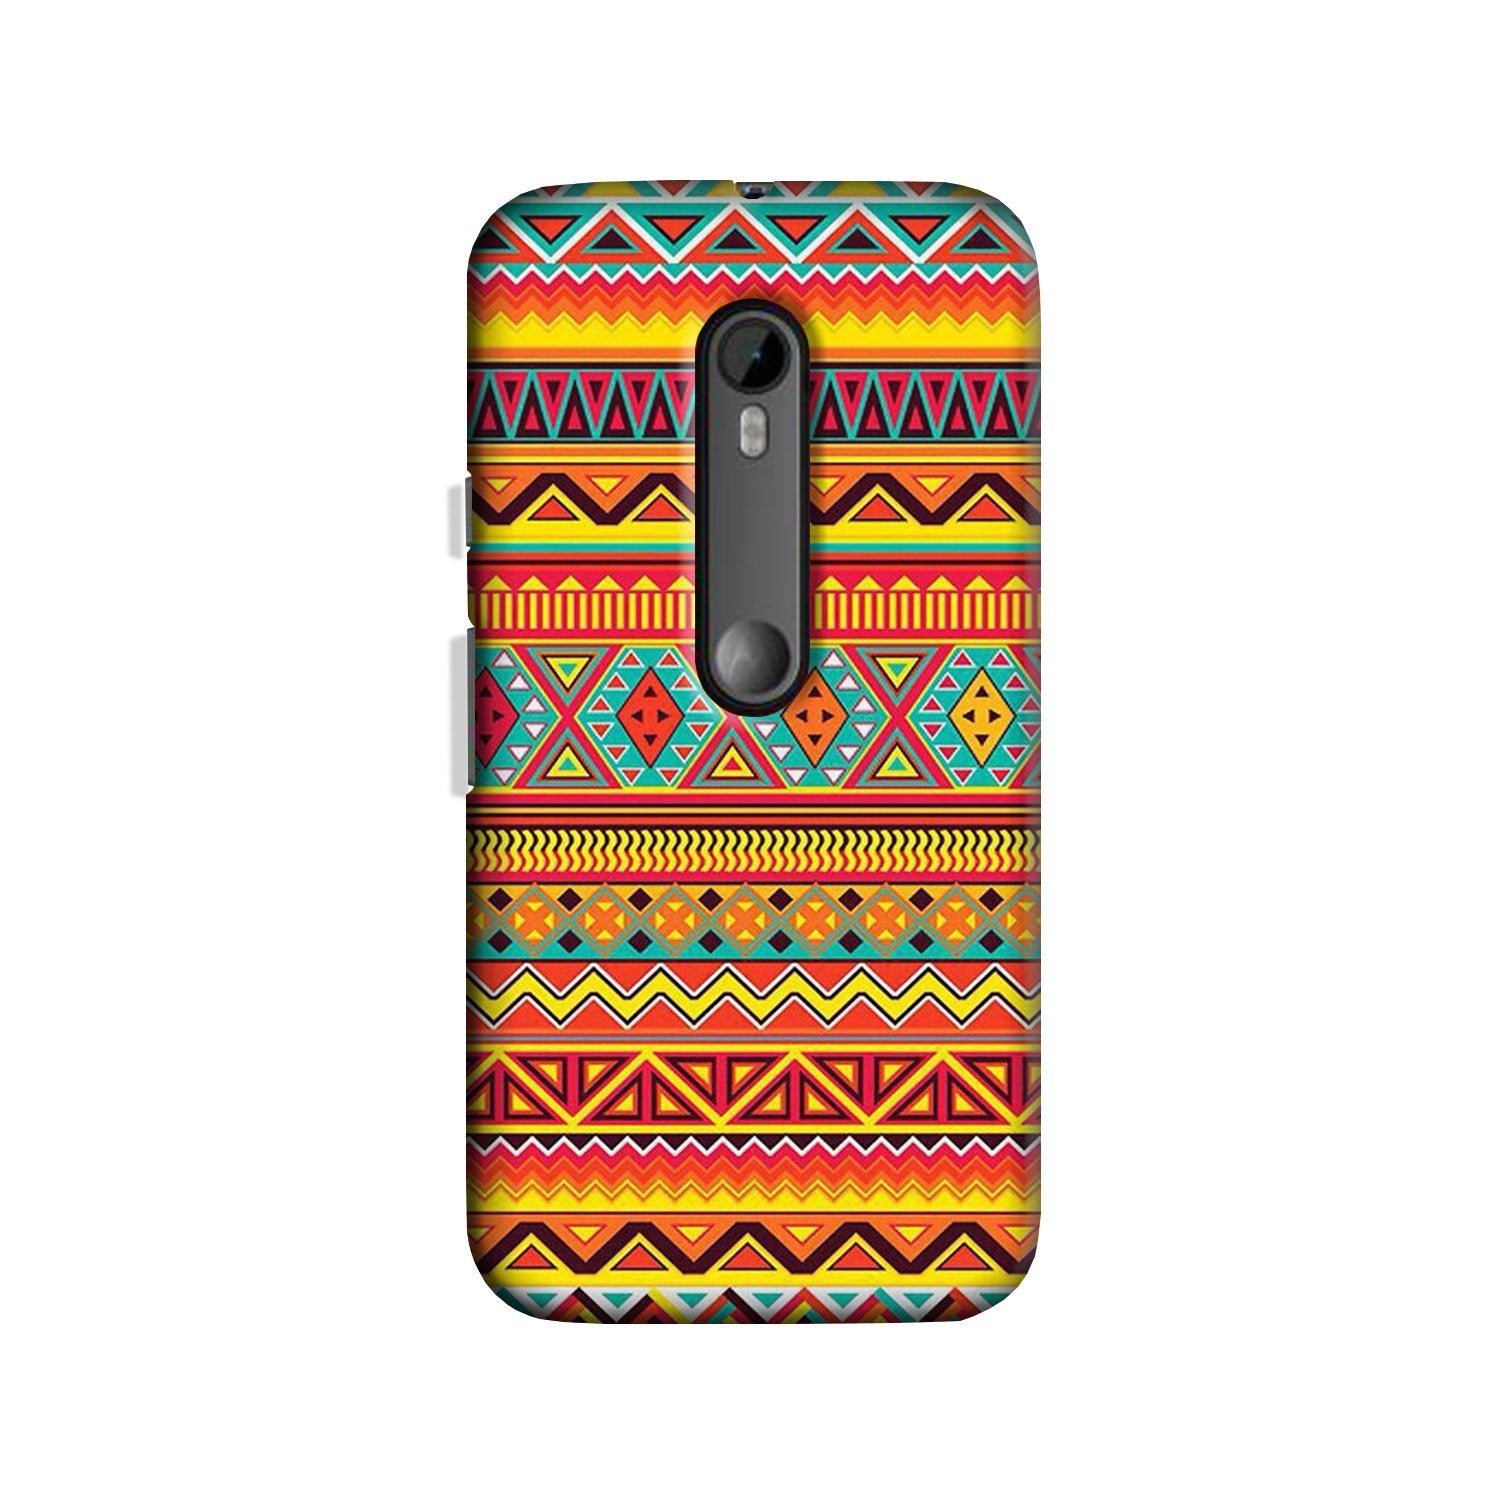 Zigzag line pattern Case for Moto X Force